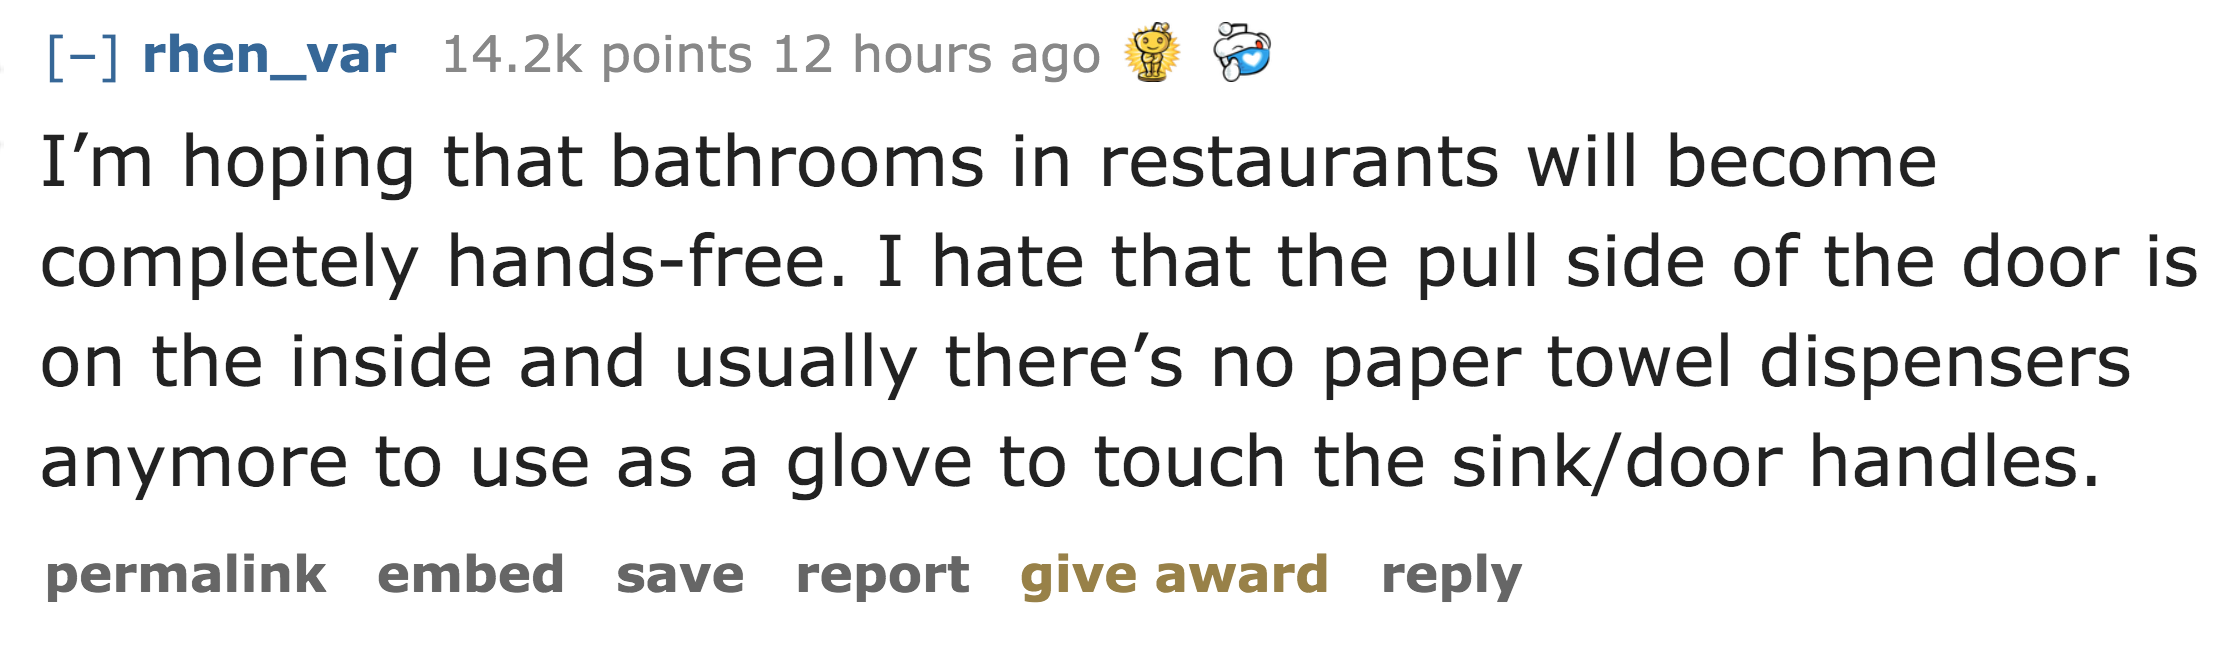 I'm hoping that bathrooms in restaurants will become completely handsfree. I hate that the pull side of the door is on the inside and usually there's no paper towel dispensers anymore to use as a glove to touch the si